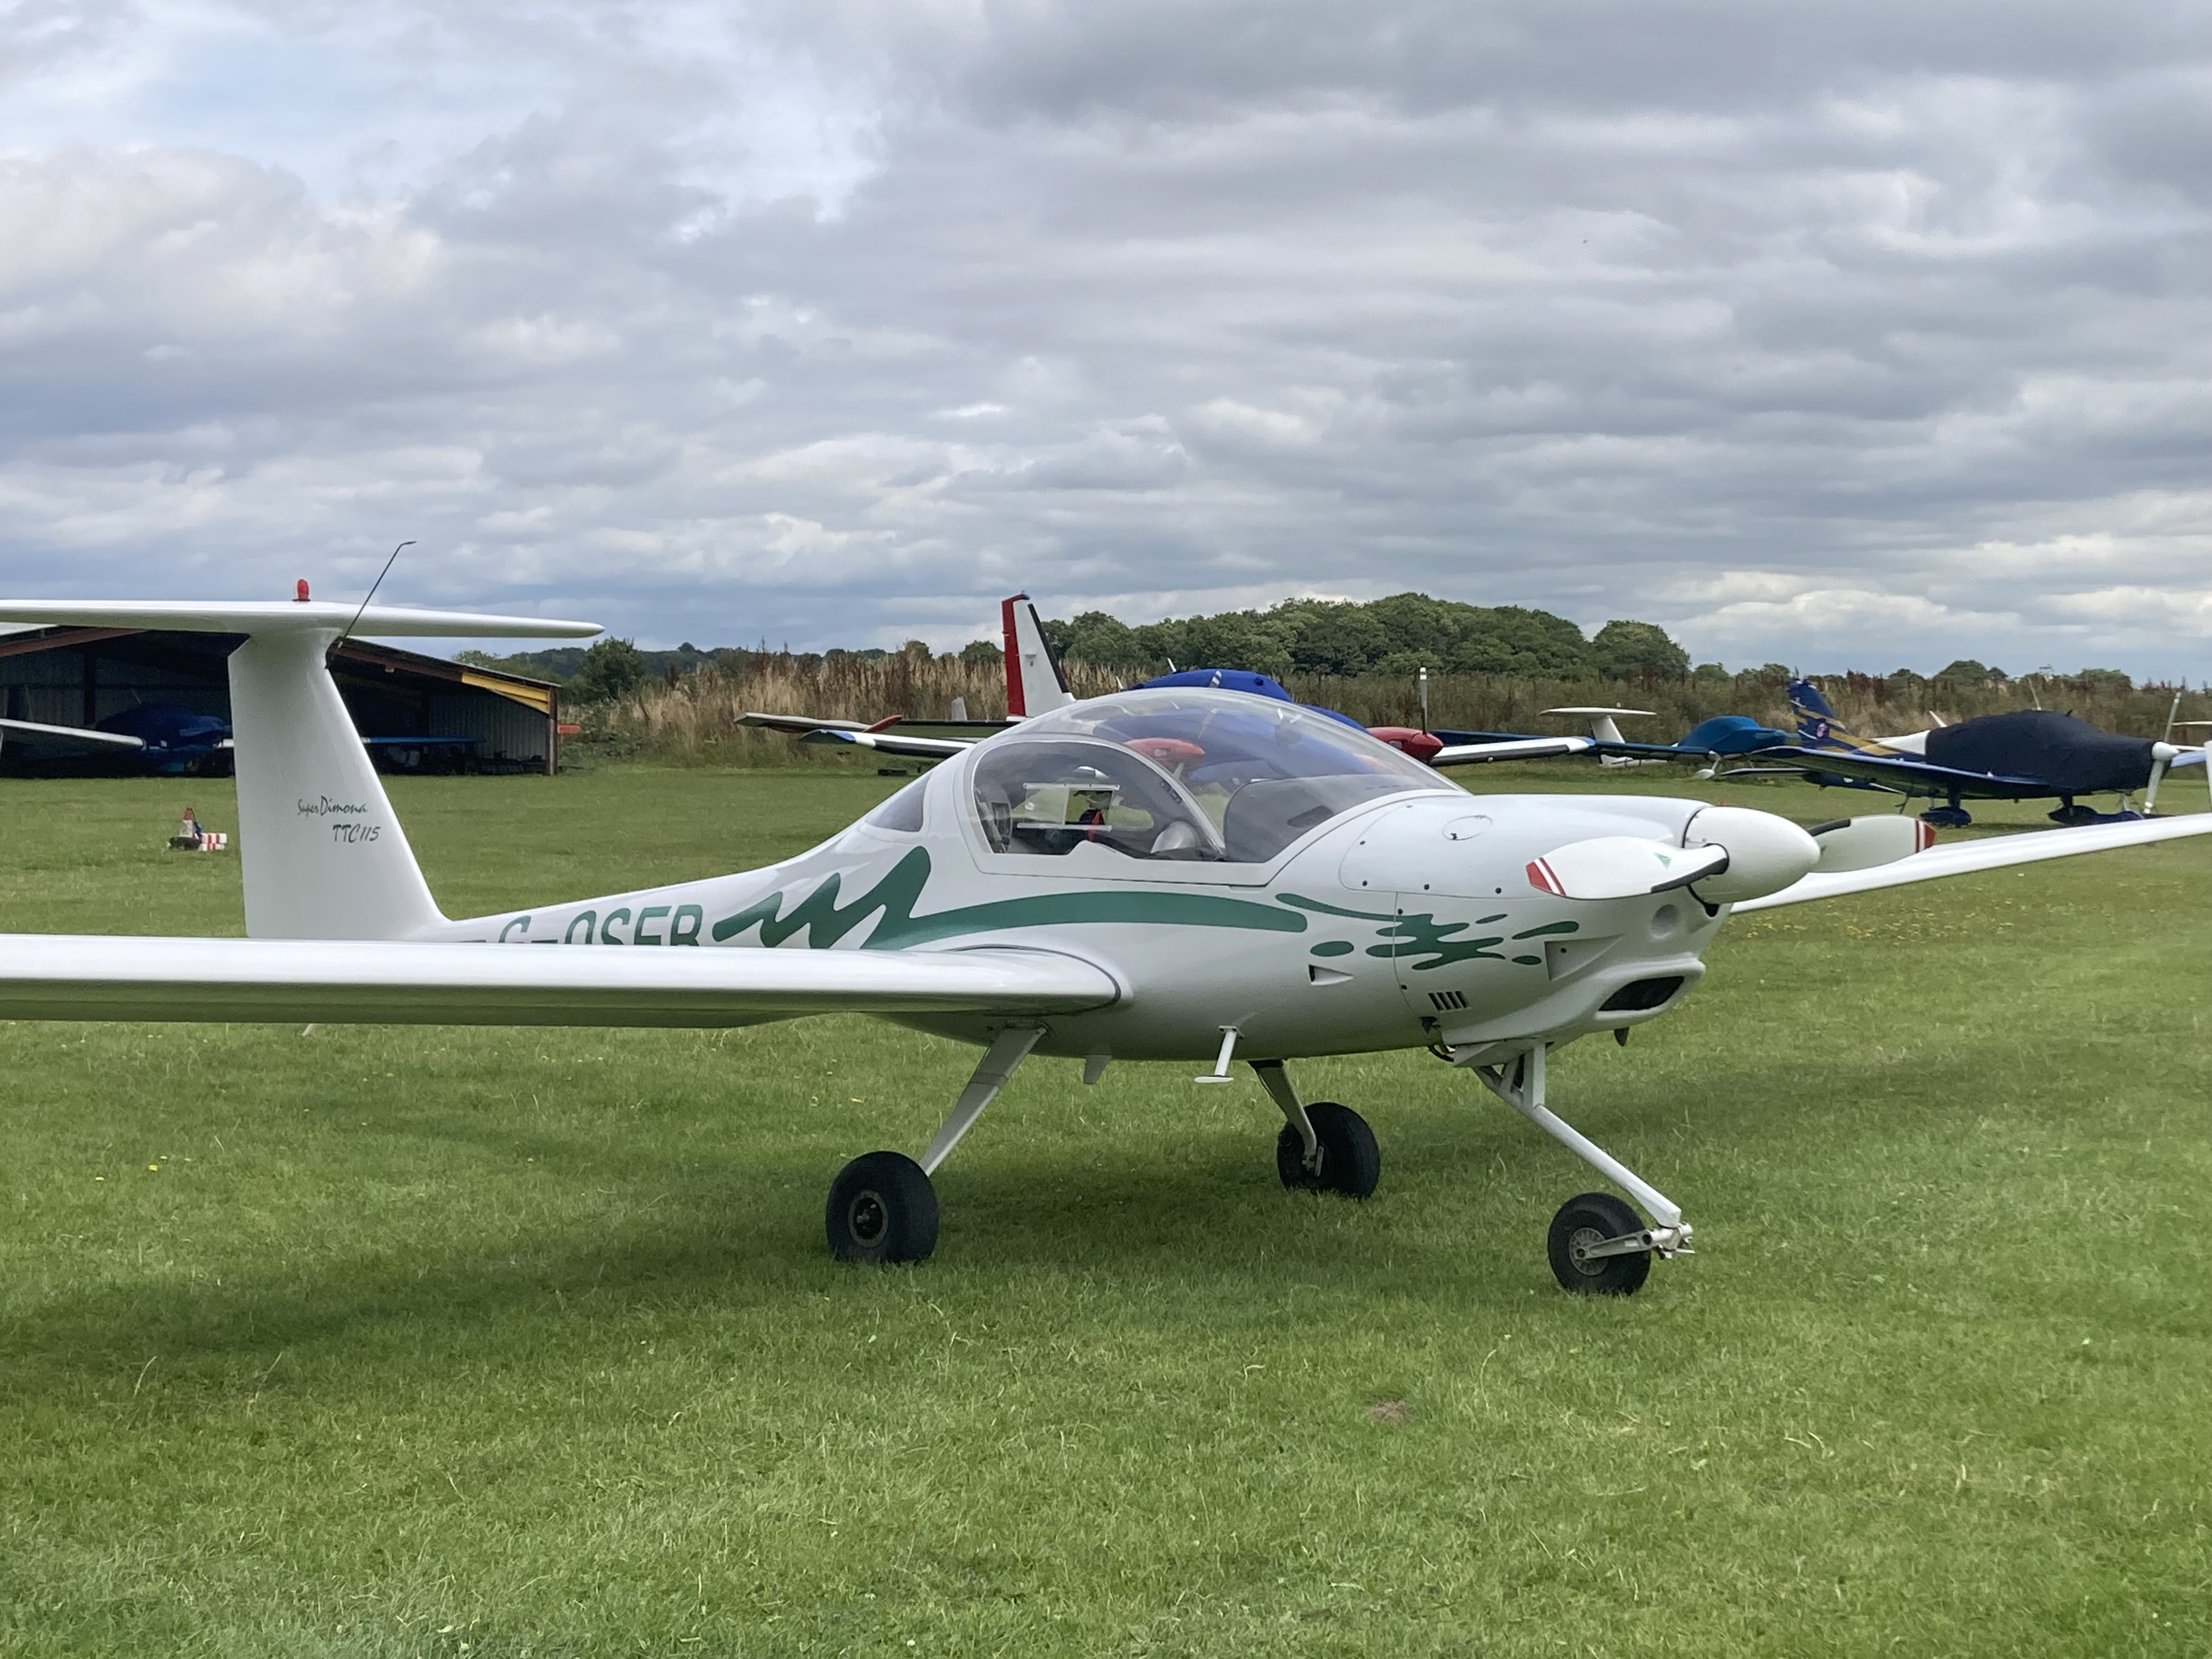 Adding a TMG Extension to your Sailplane Towing Licence